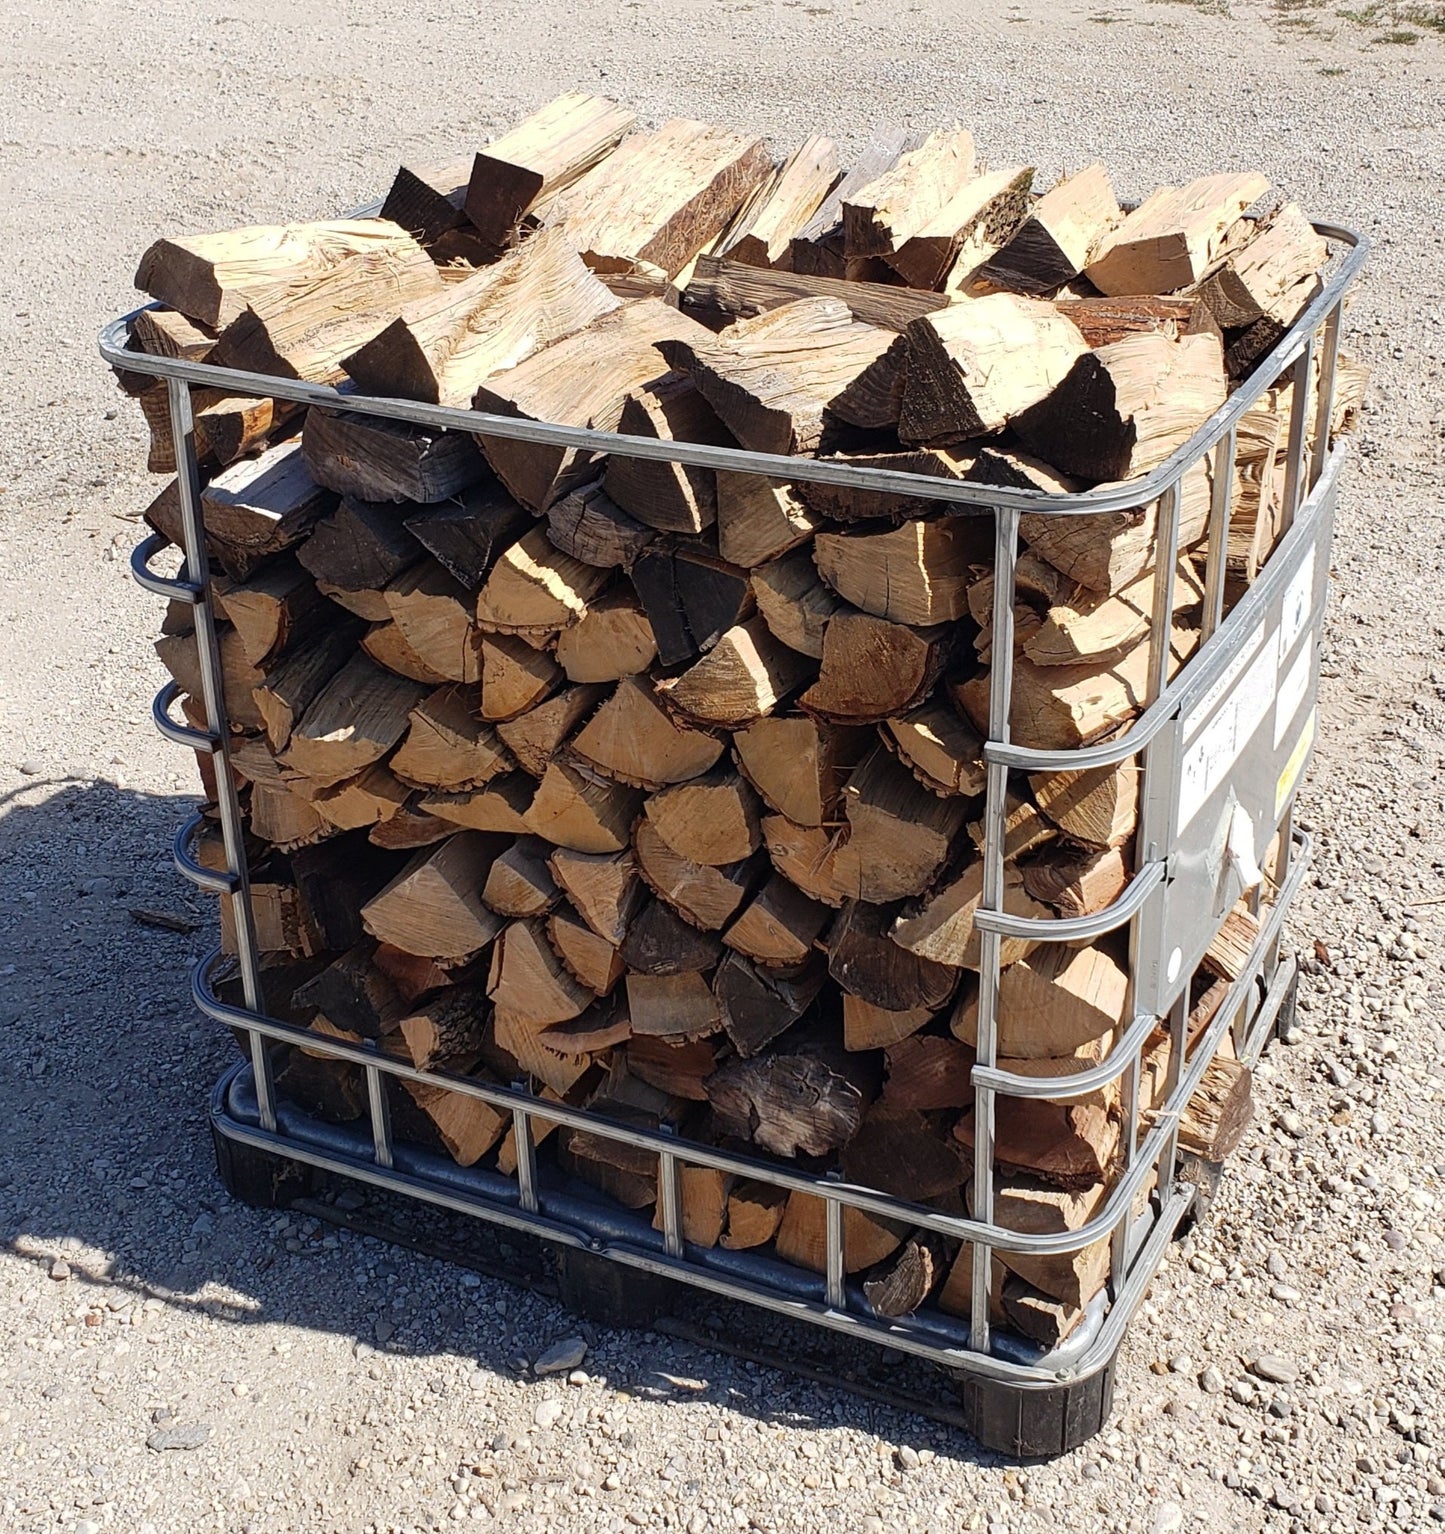 Front angle view of double stack firewood crate outside in the sun